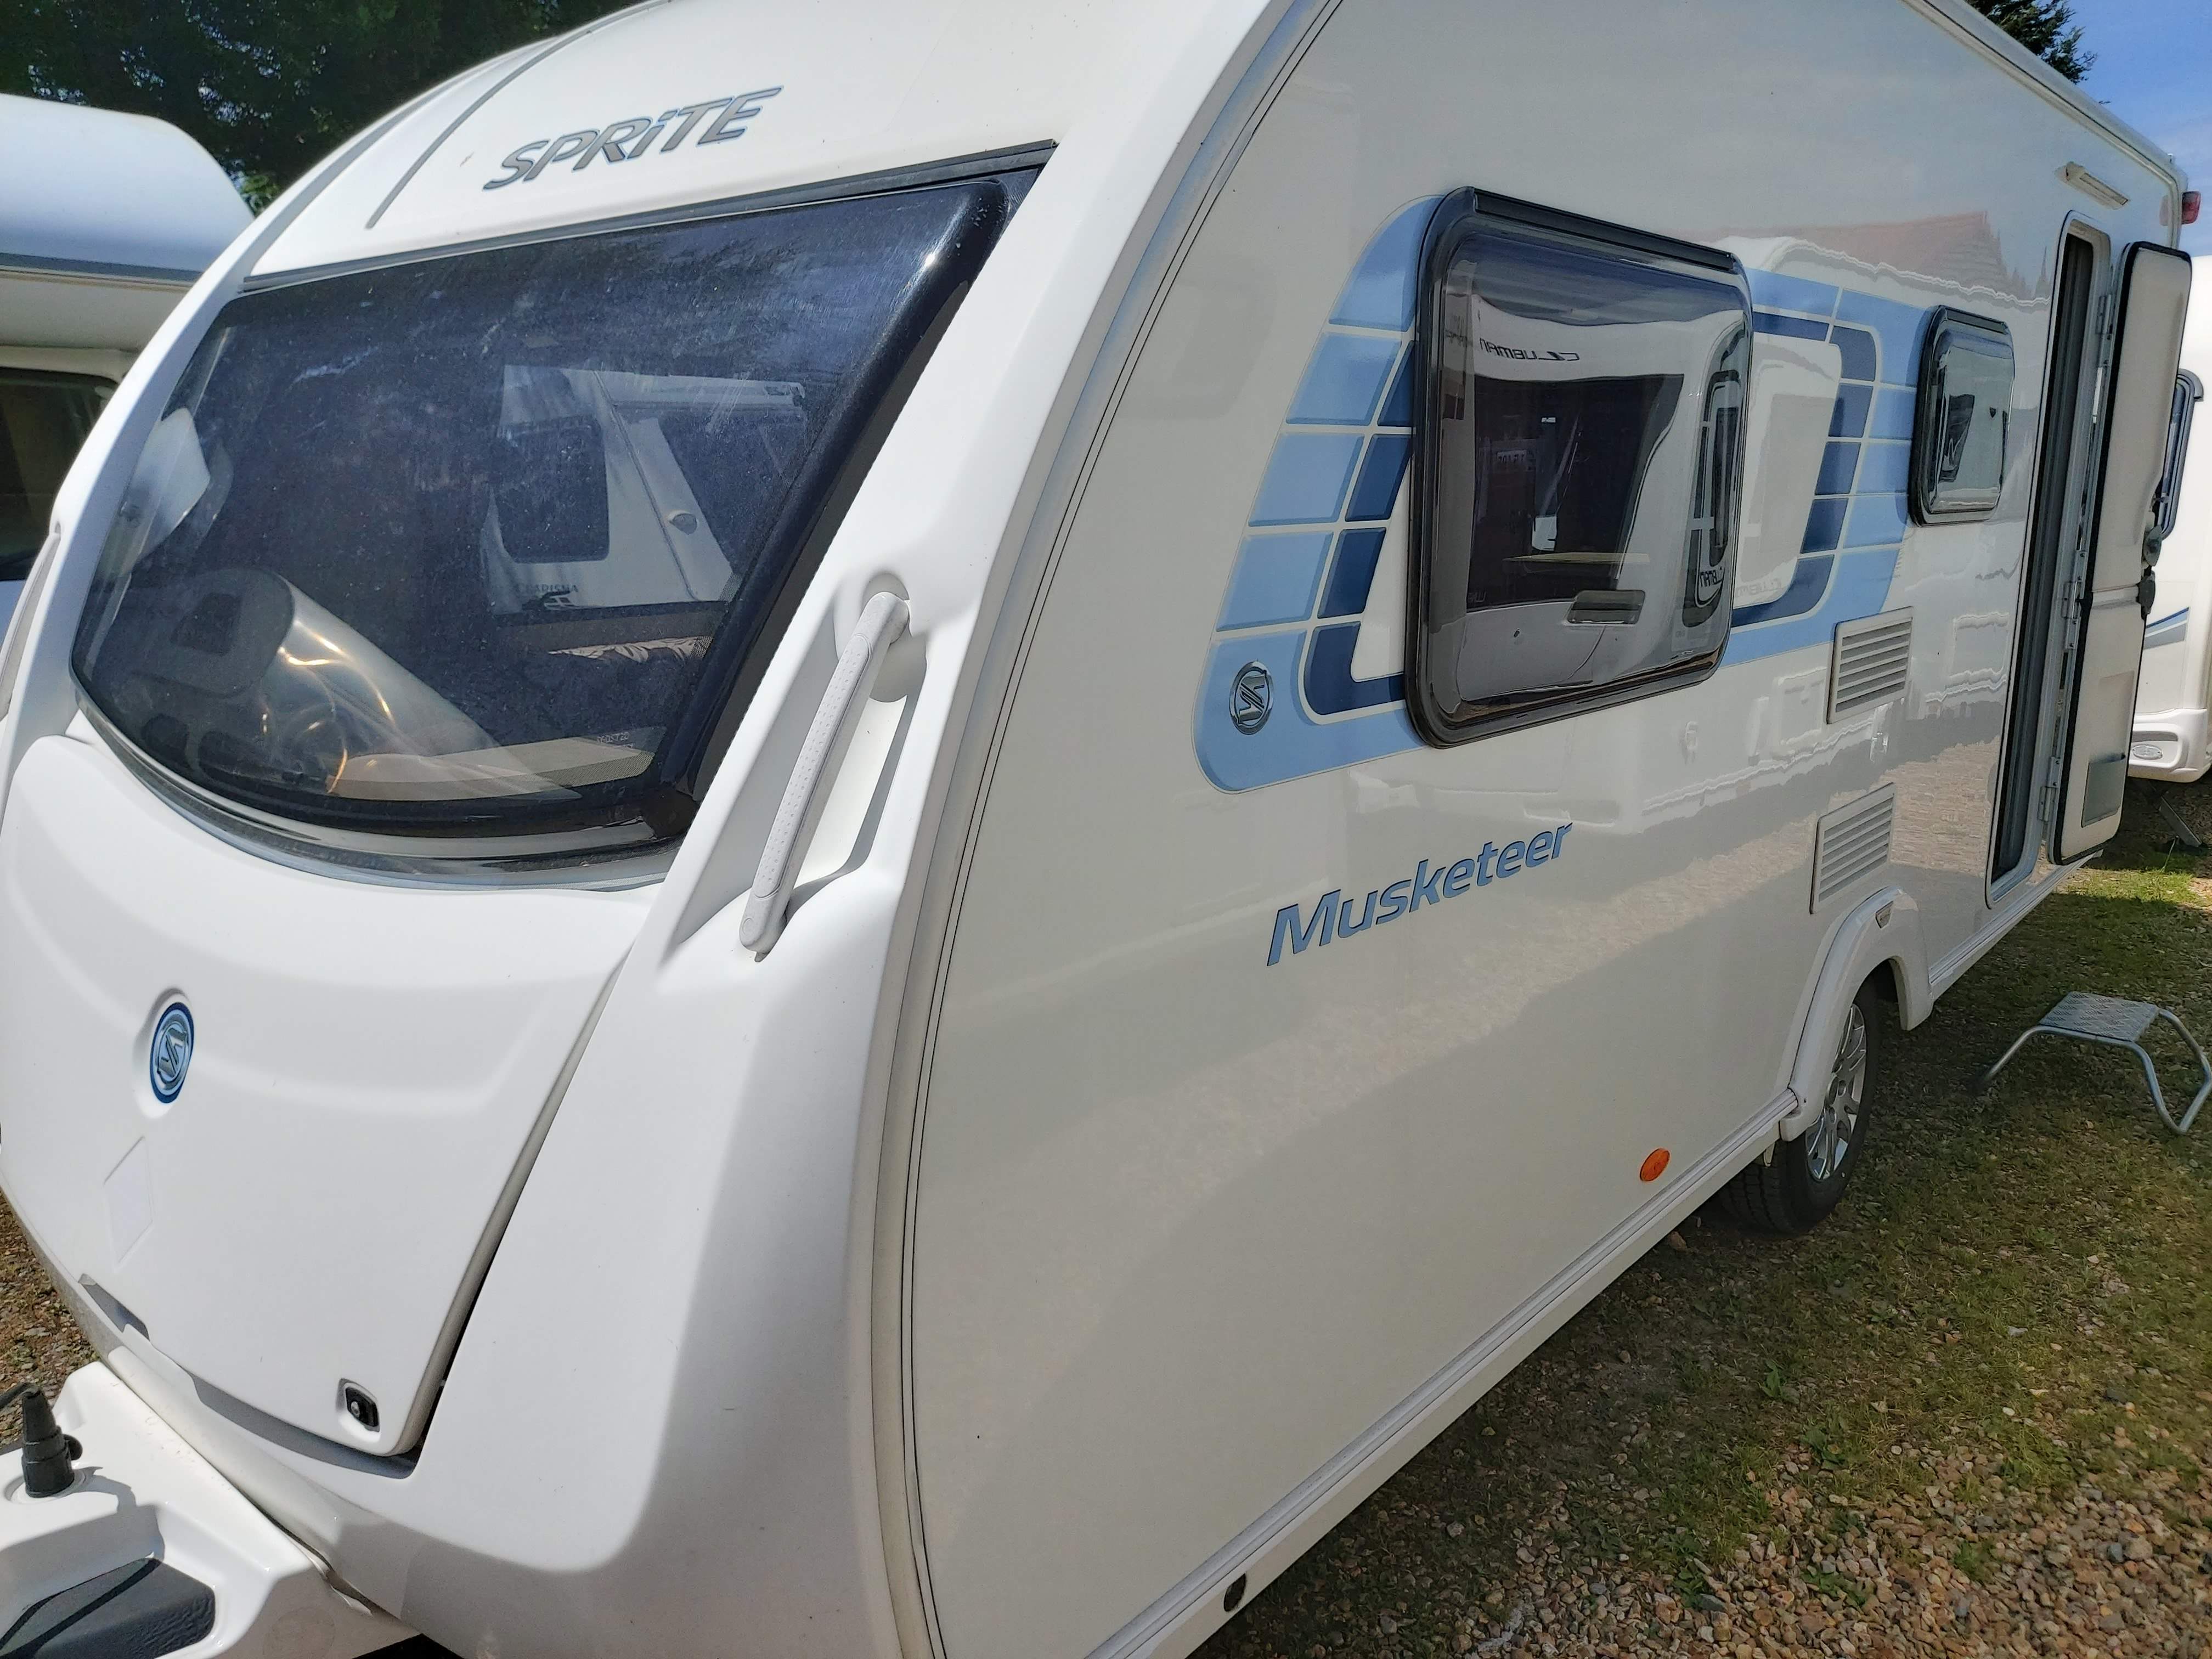 NOW SOLD 2012 Sprite Musketeer EB 4 Berth Rear Bunks Lightweight Caravan Motor Mover, Awning